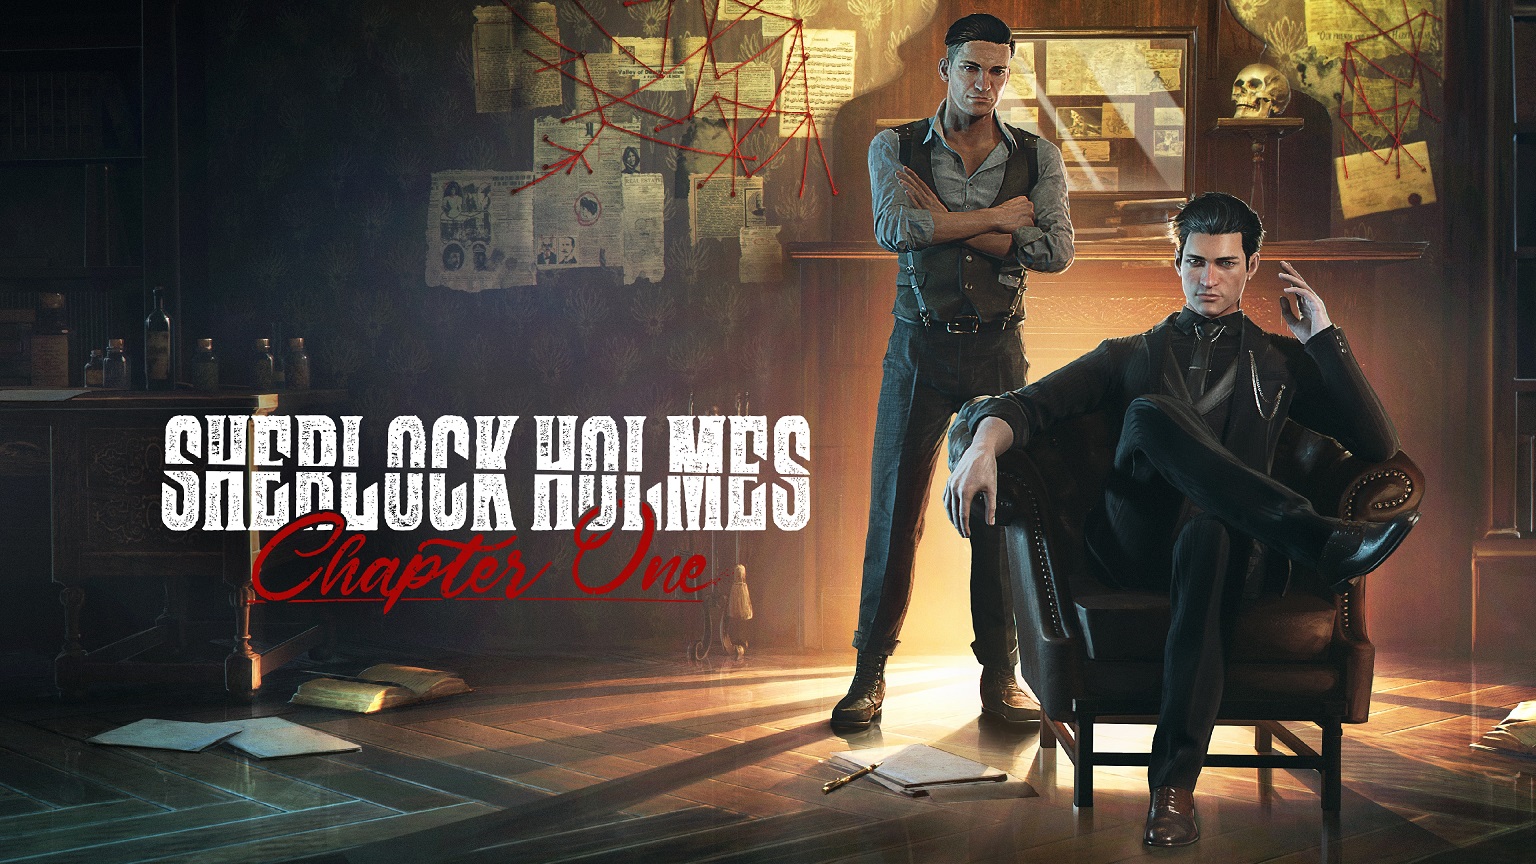 Shelock holmes chapter one dlc